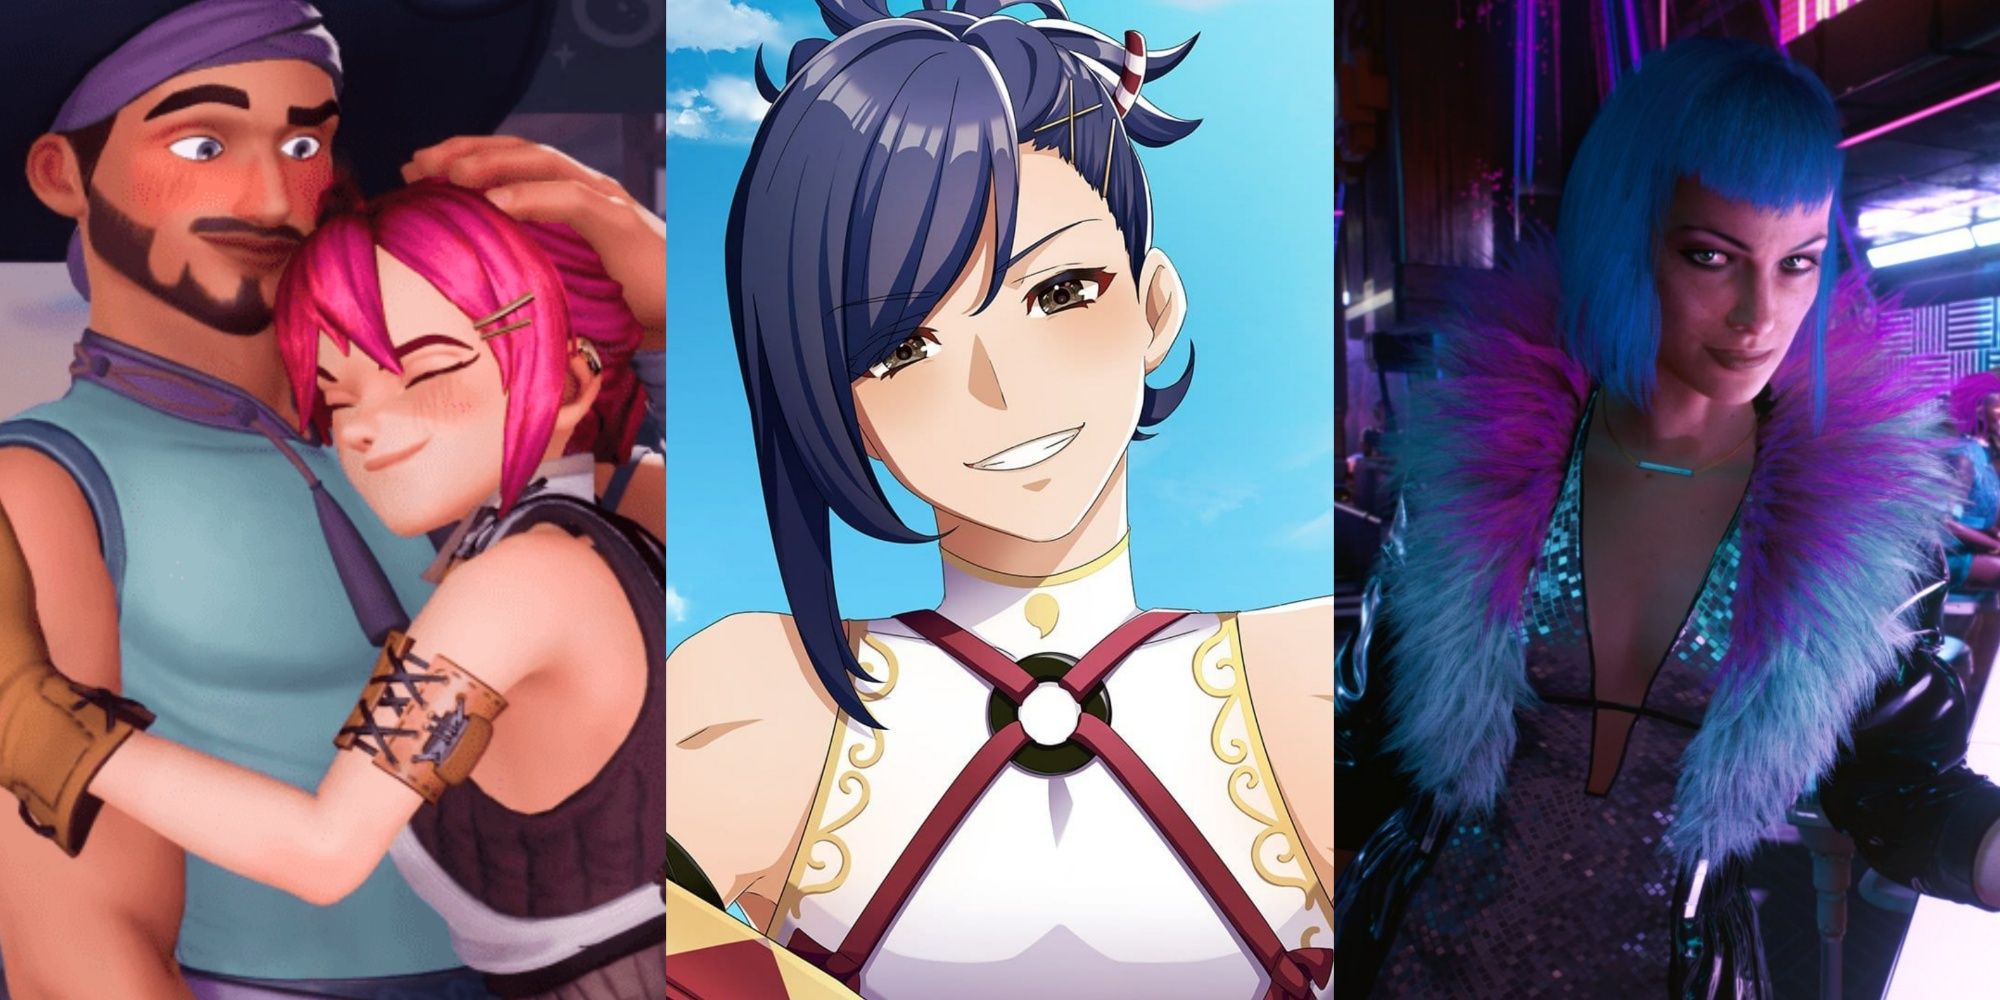 Sylvia hugging Corsac in Potionomics, Kagetsu grinning at the viewer in Fire Emblem Engage, and Evelyn smiling at the camera in Cyberpunk 2077